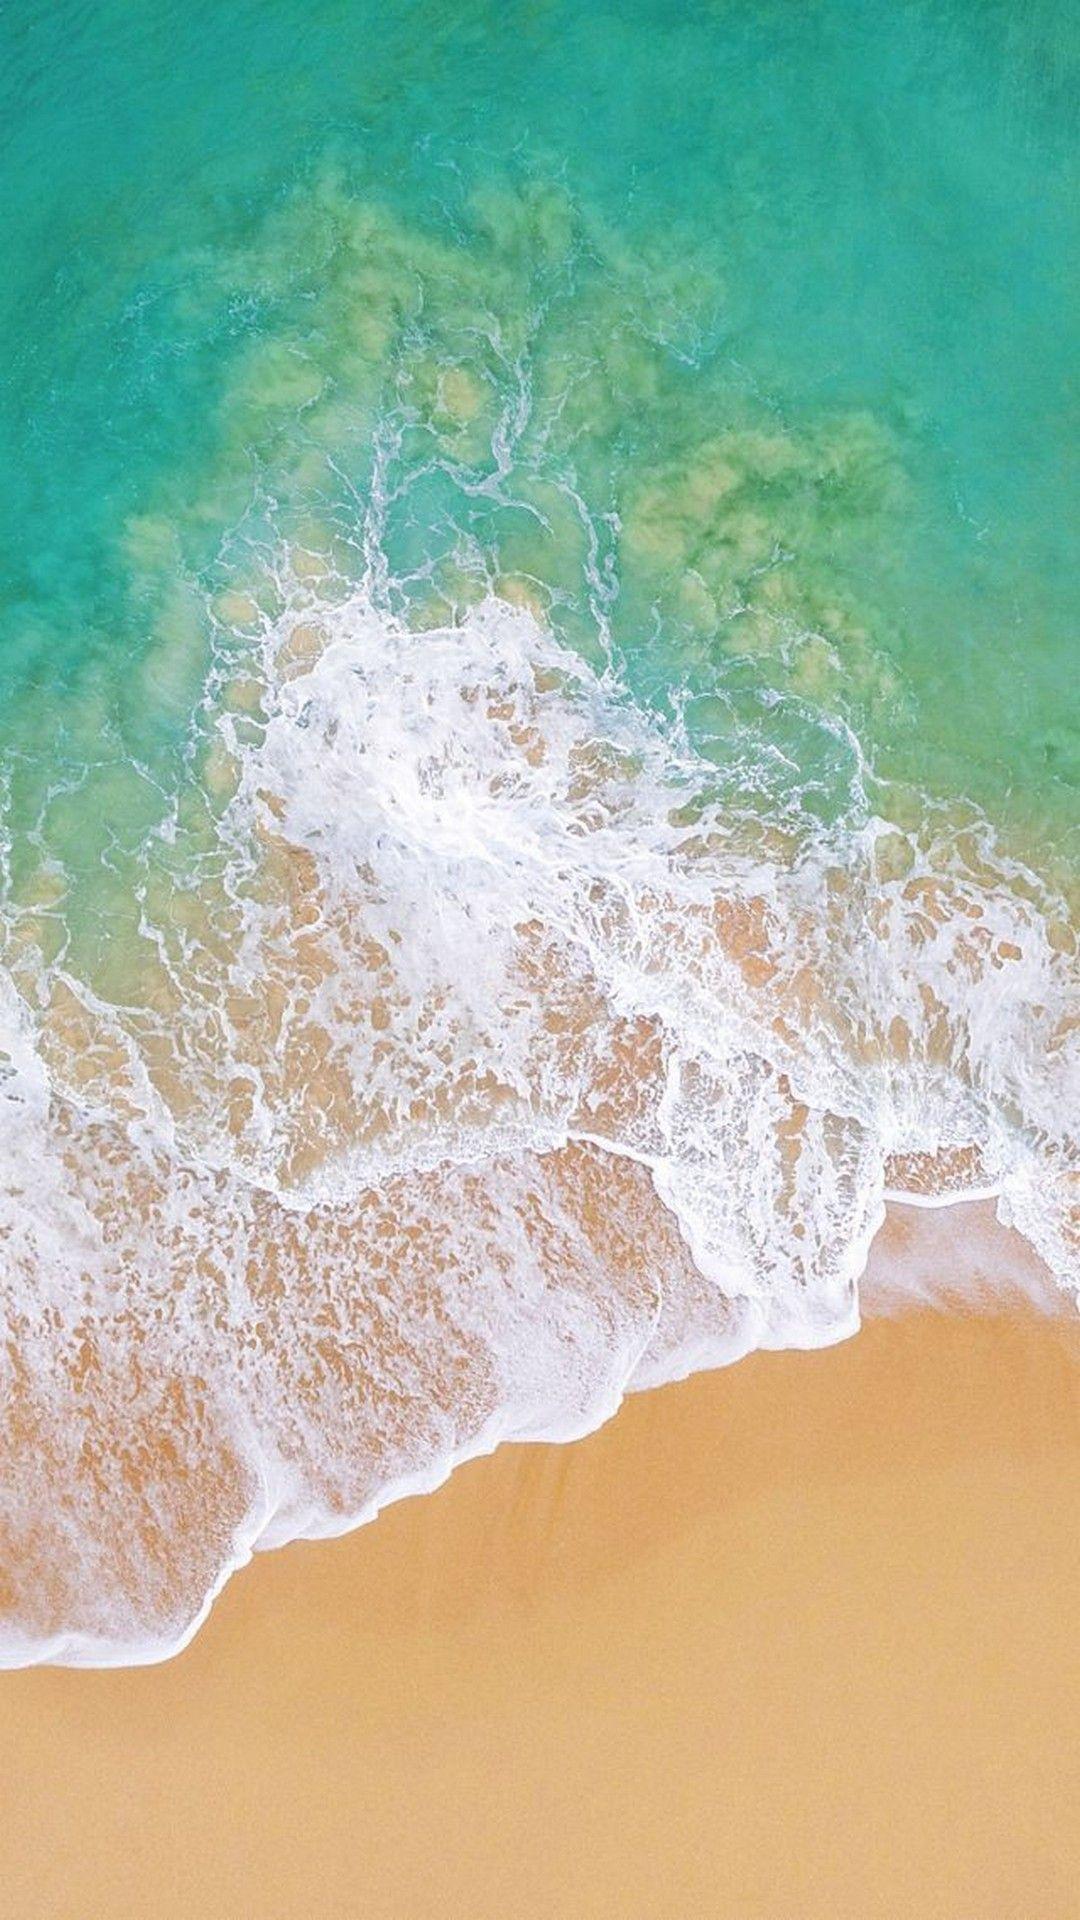 Iphone 11 Stock Wallpapers